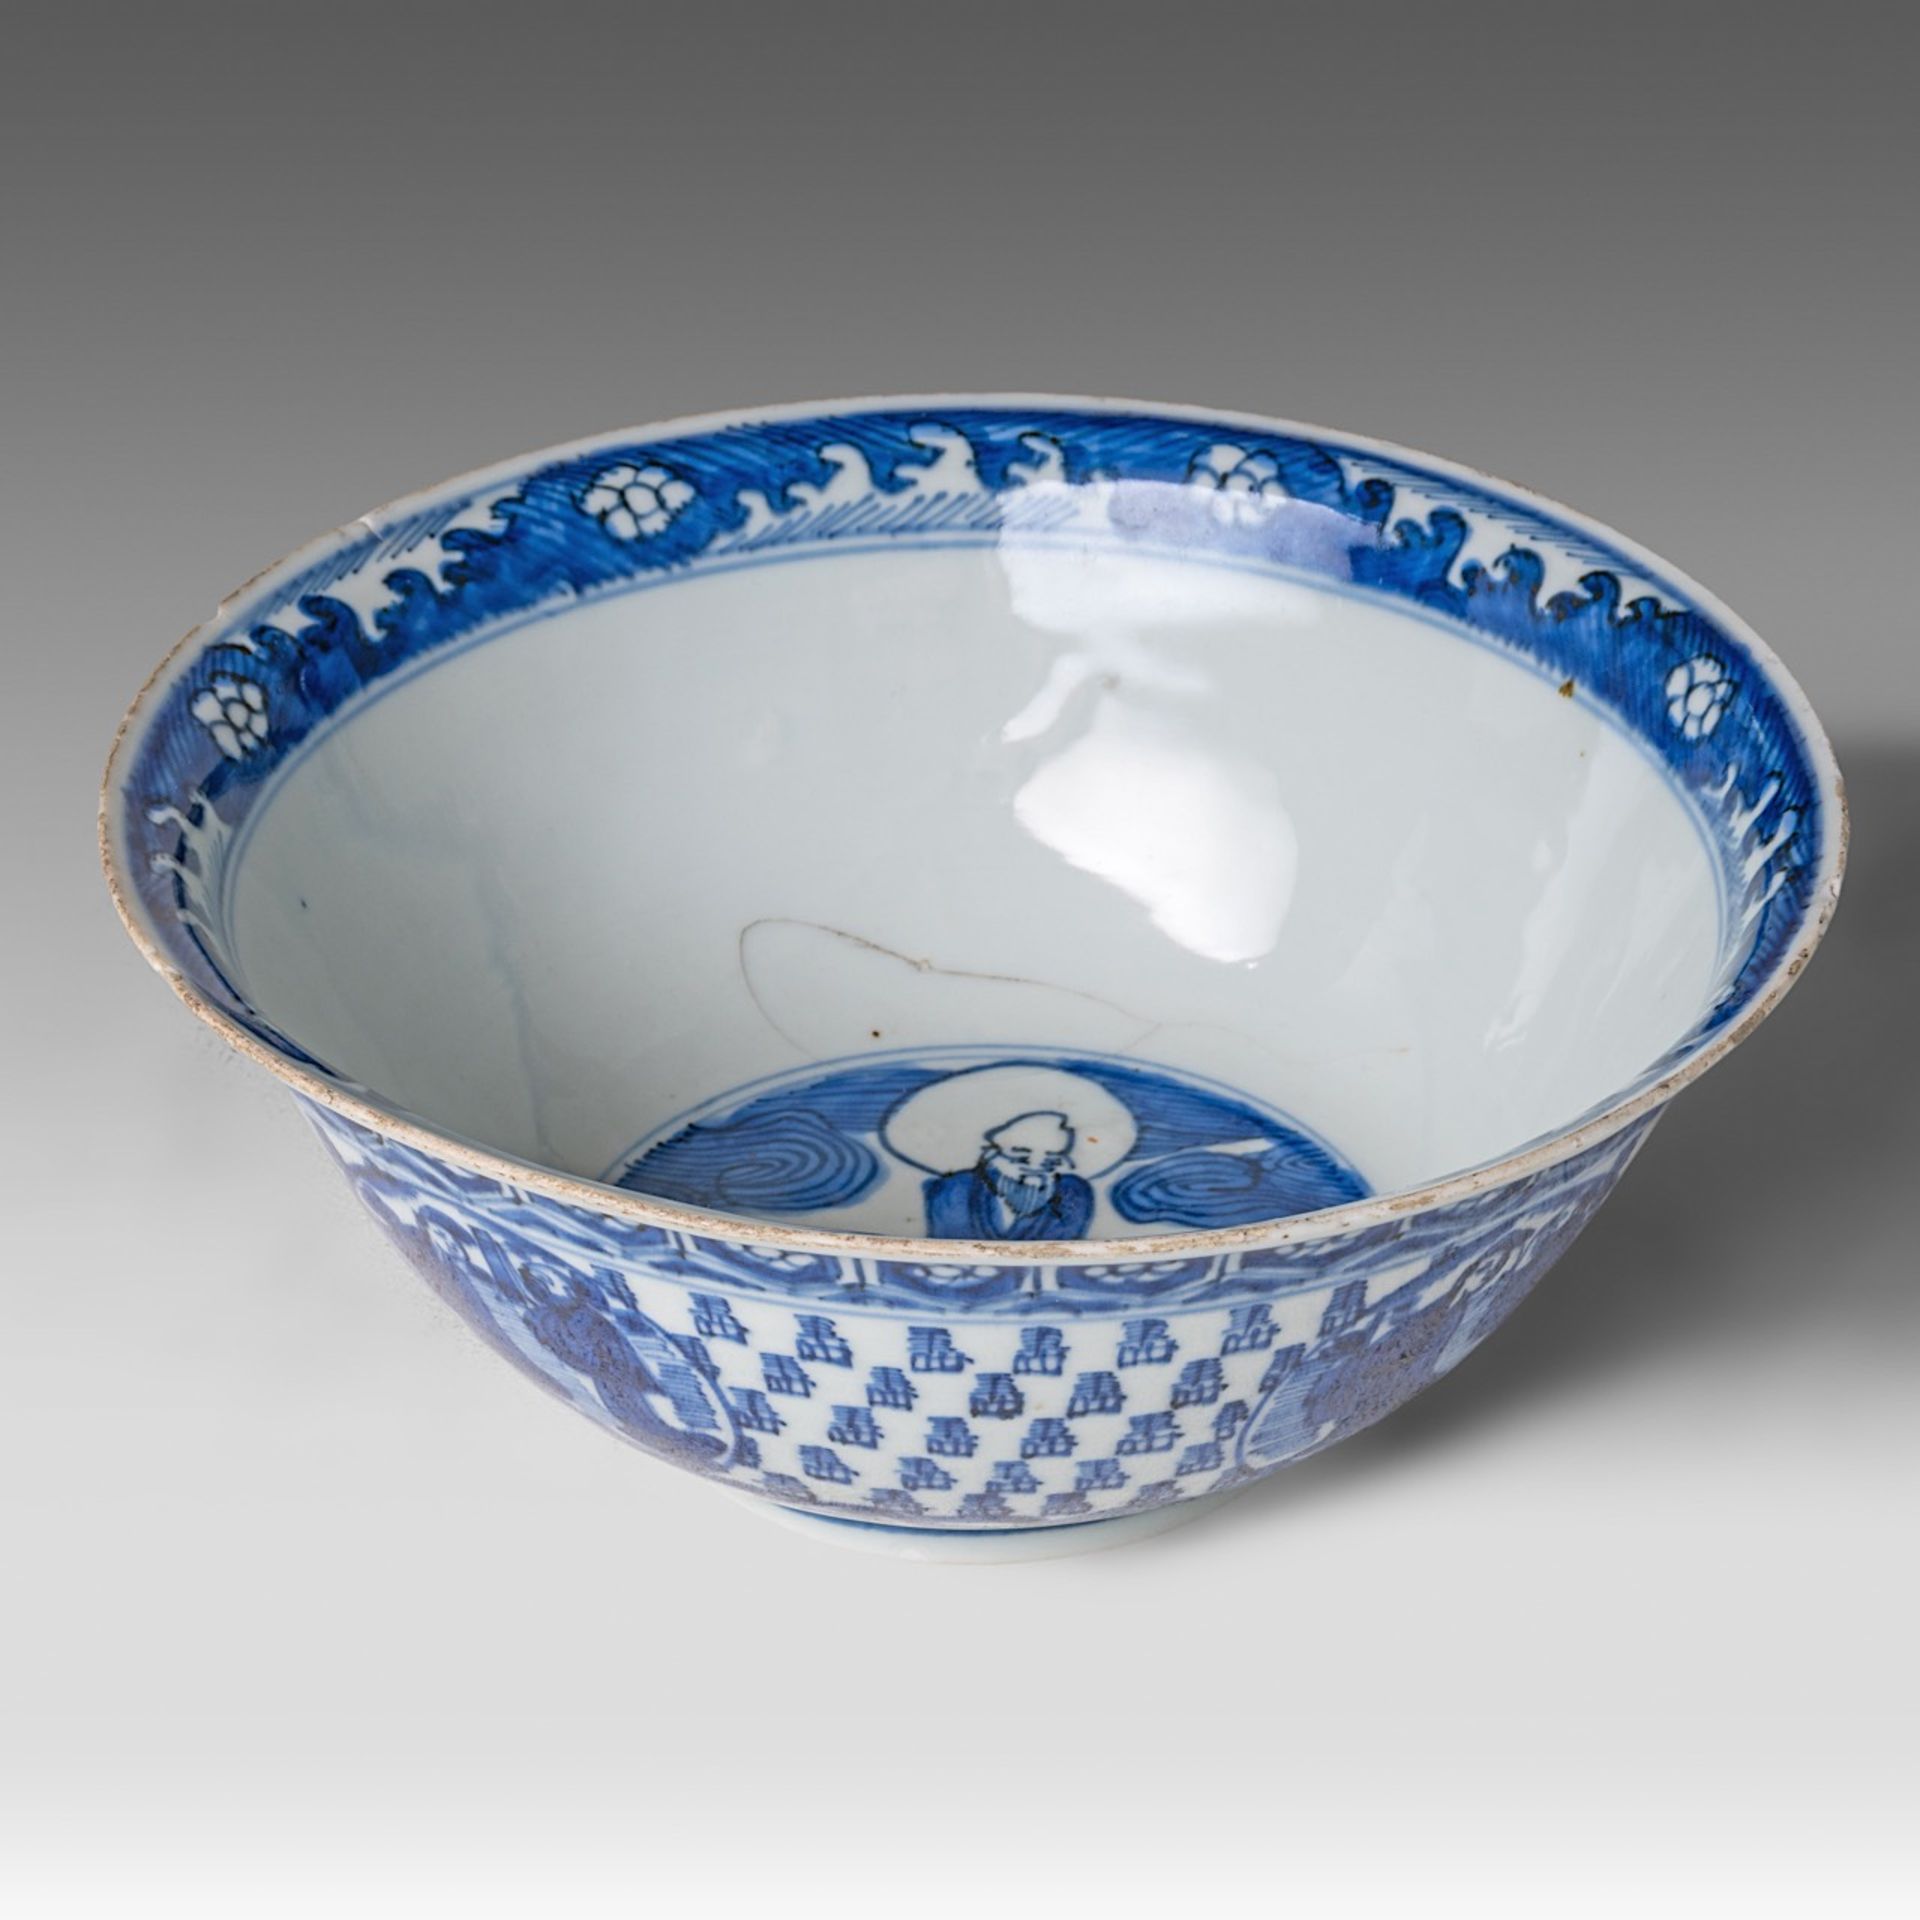 A Chinese blue and white 'Luohan' bowl, Wanli period, Ming dynasty, H 9 - dia 22,5 cm - Image 7 of 8